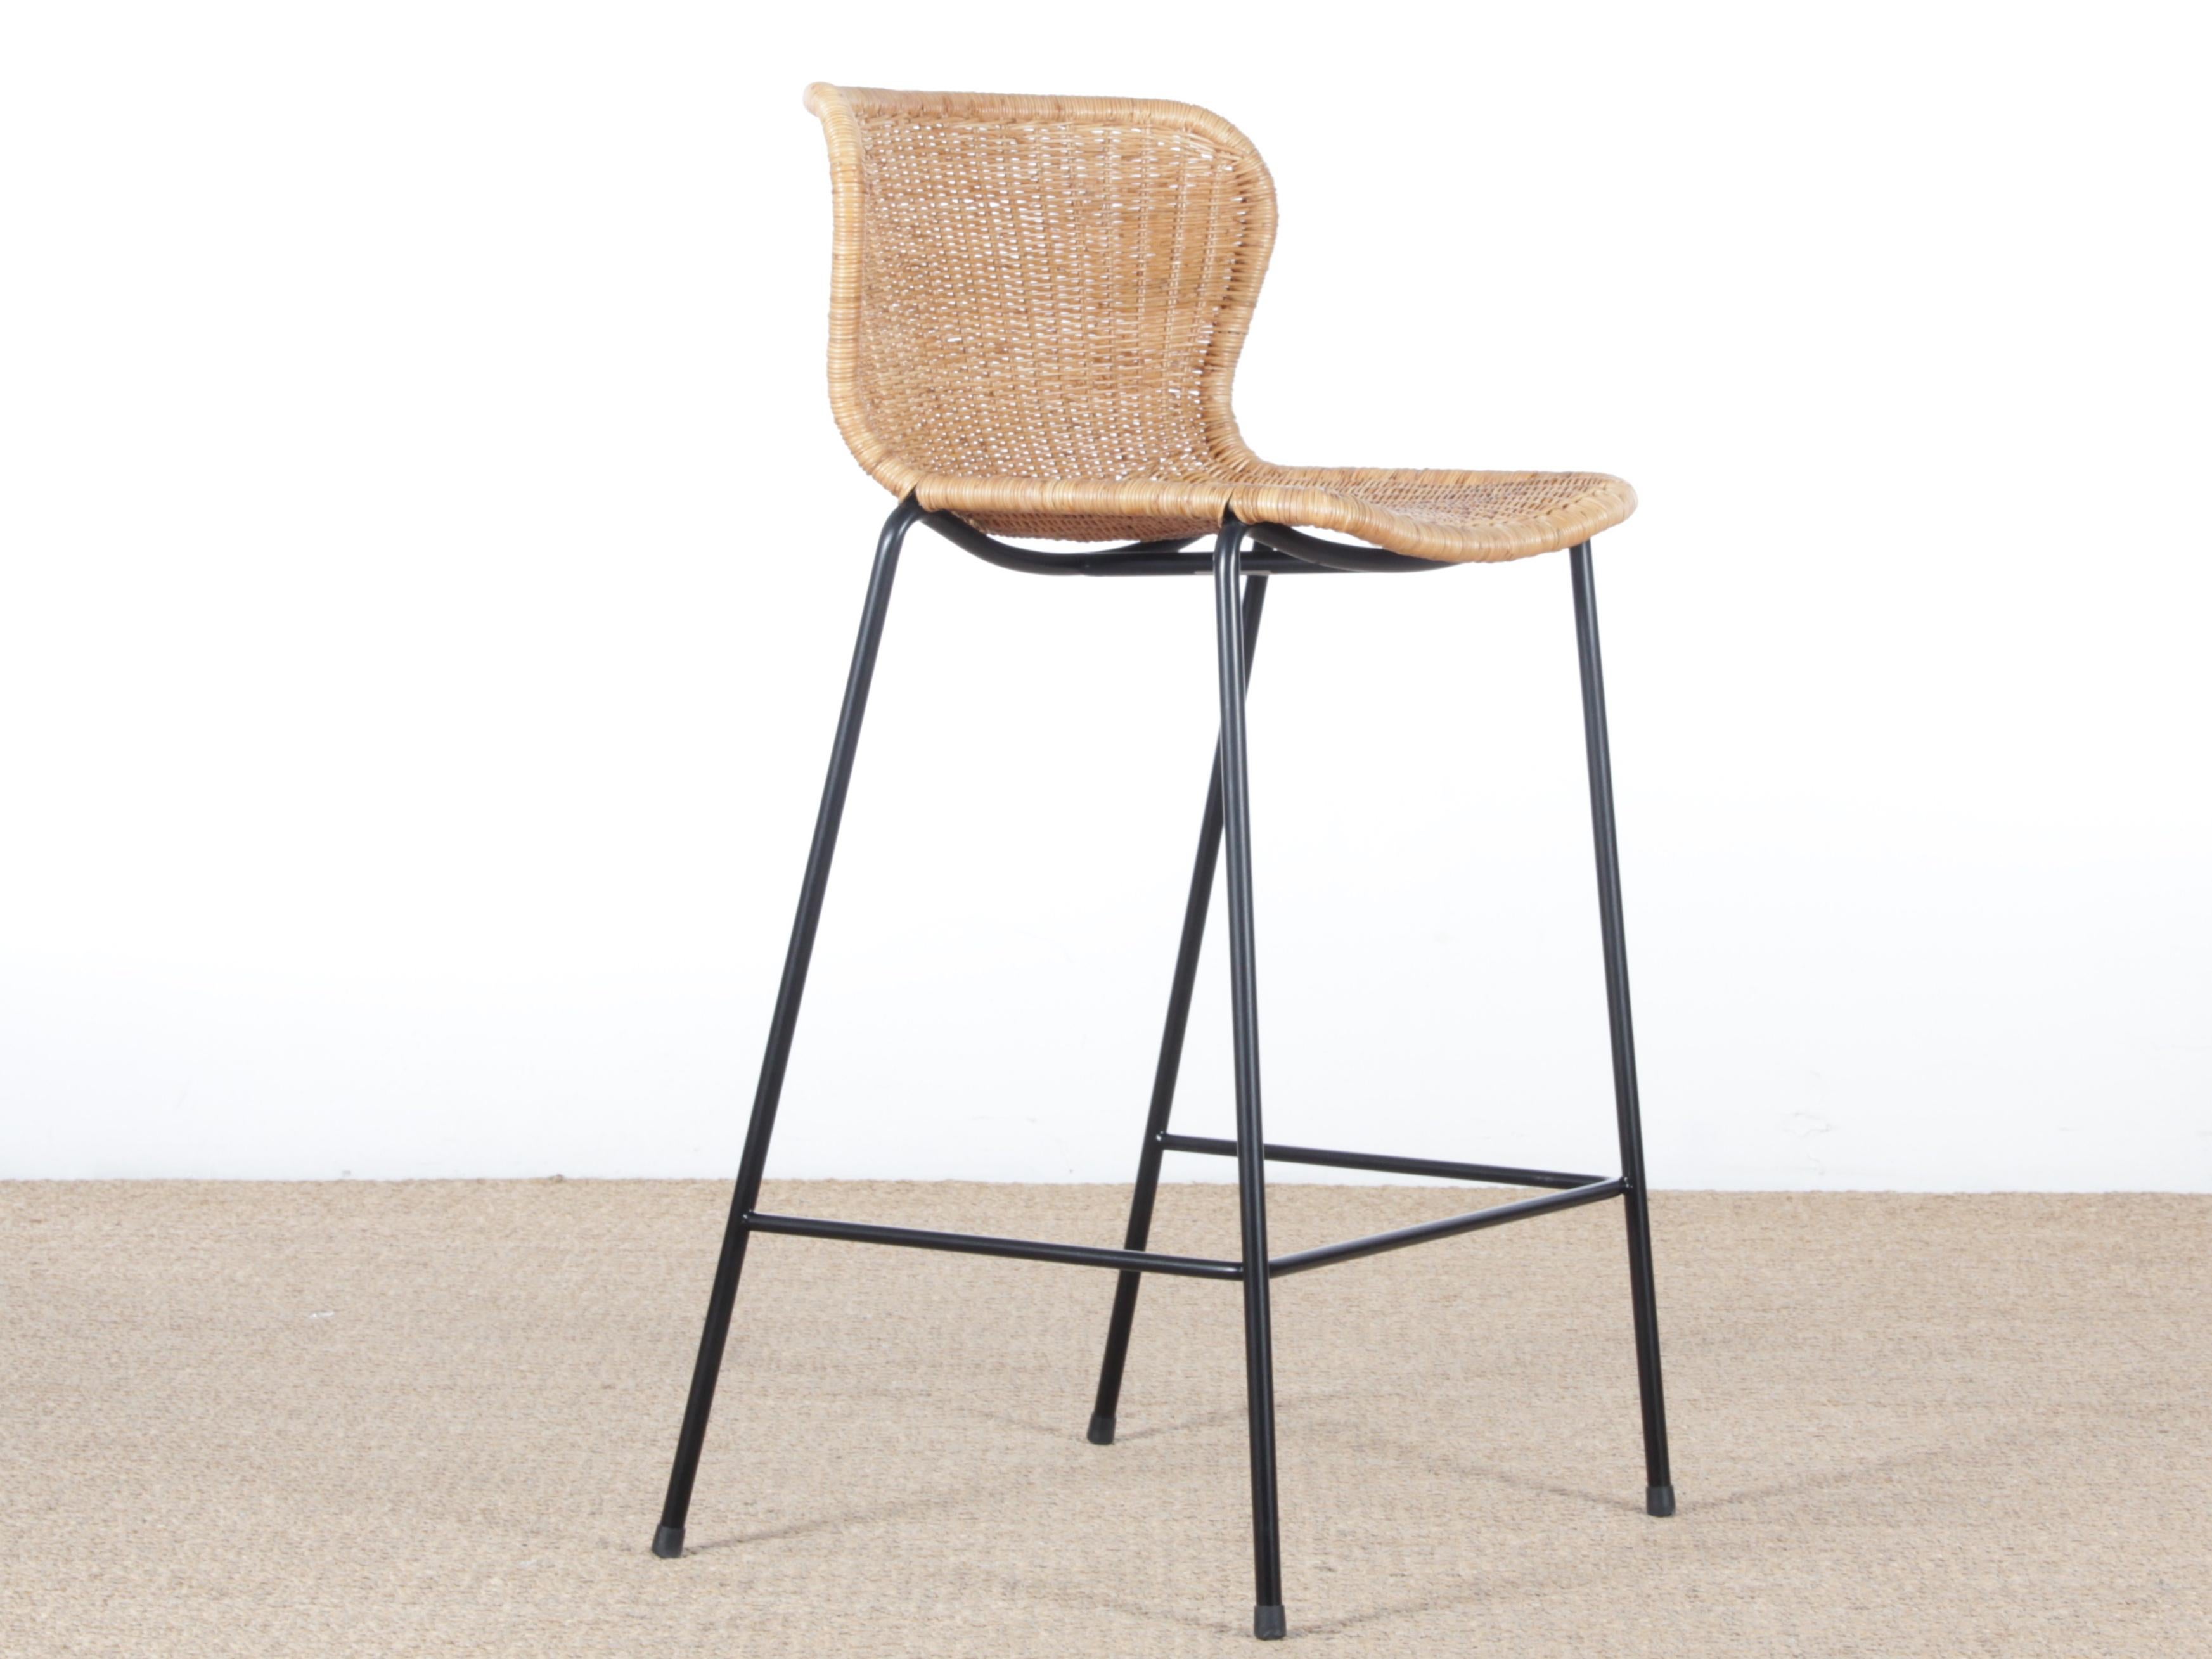 The C603 bar stool is a variation of the C603 Chair by the Japanese designer Yuzuru Yamakawa designed in 1958. A true icon of design, it has been reissued since 2017.

Black lacquered steel structure. Braided and varnished rattan.

Exists in